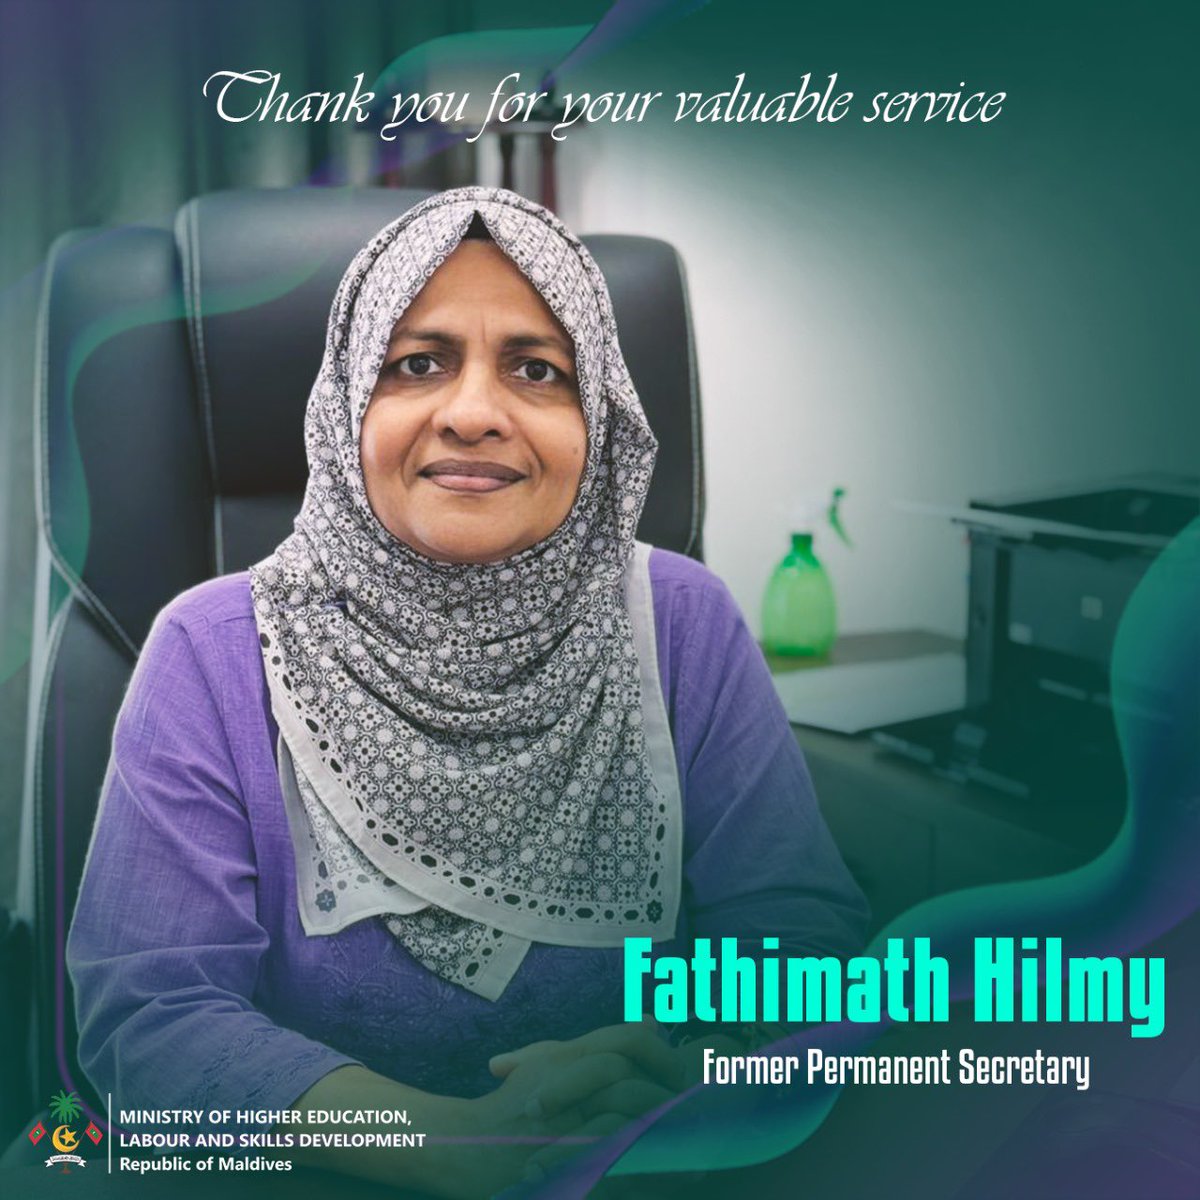 With deep gratitude, we commend Fathimath Hilmy for her exceptional service as she bids farewell after her tenure.